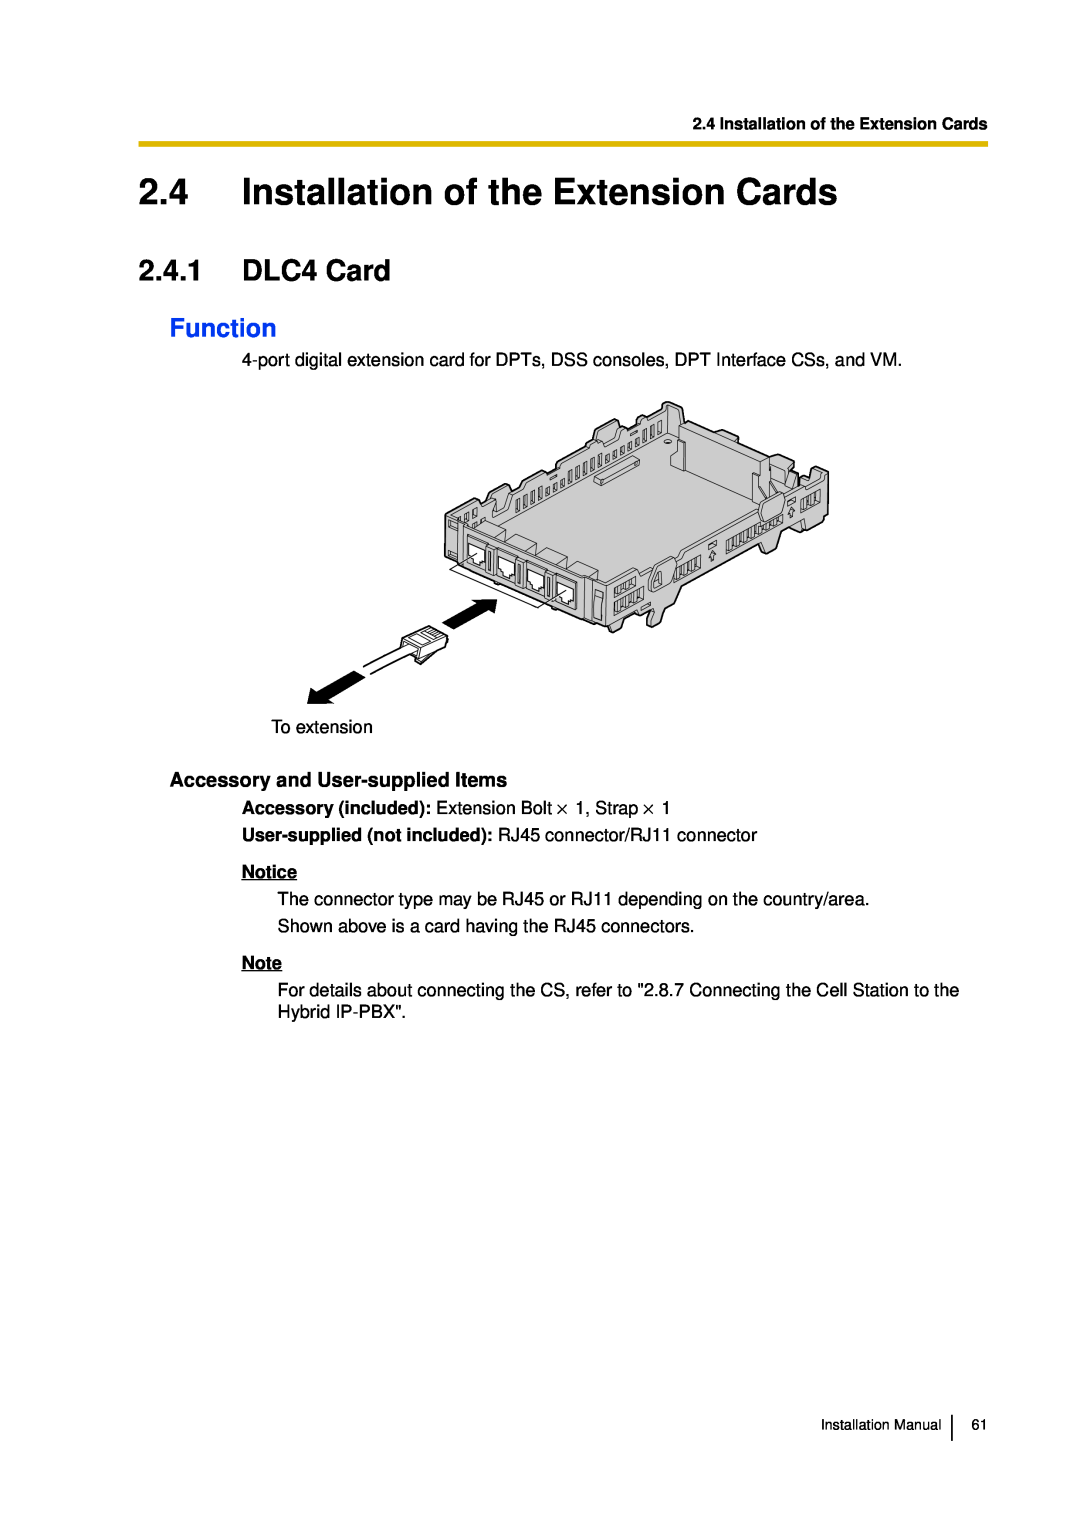 Panasonic KX-TDA30 installation manual 2.4Installation of the Extension Cards, 2.4.1DLC4 Card, Function, Notice 